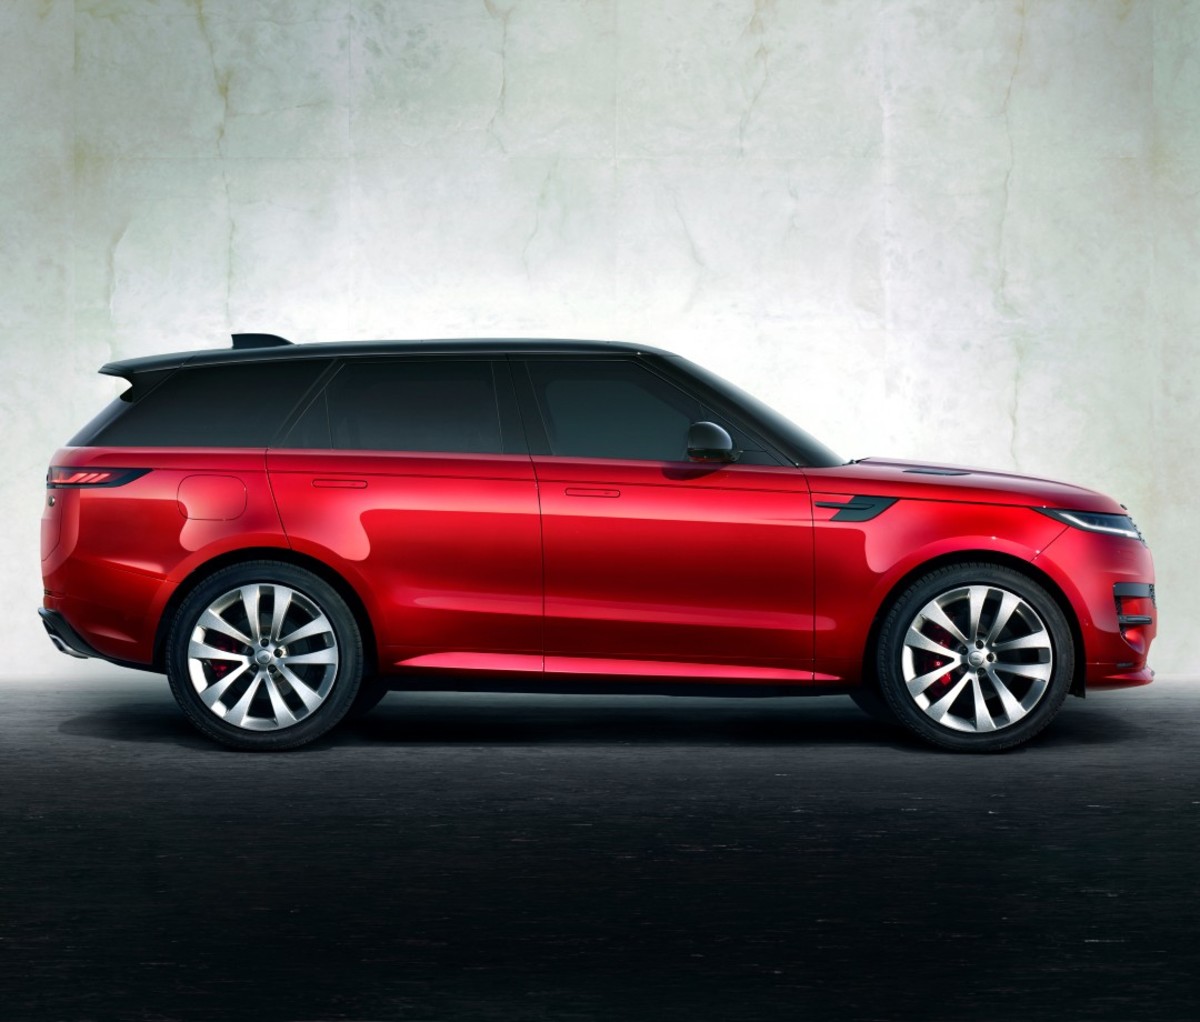 A side view of the 2023 Range Rover Sport.